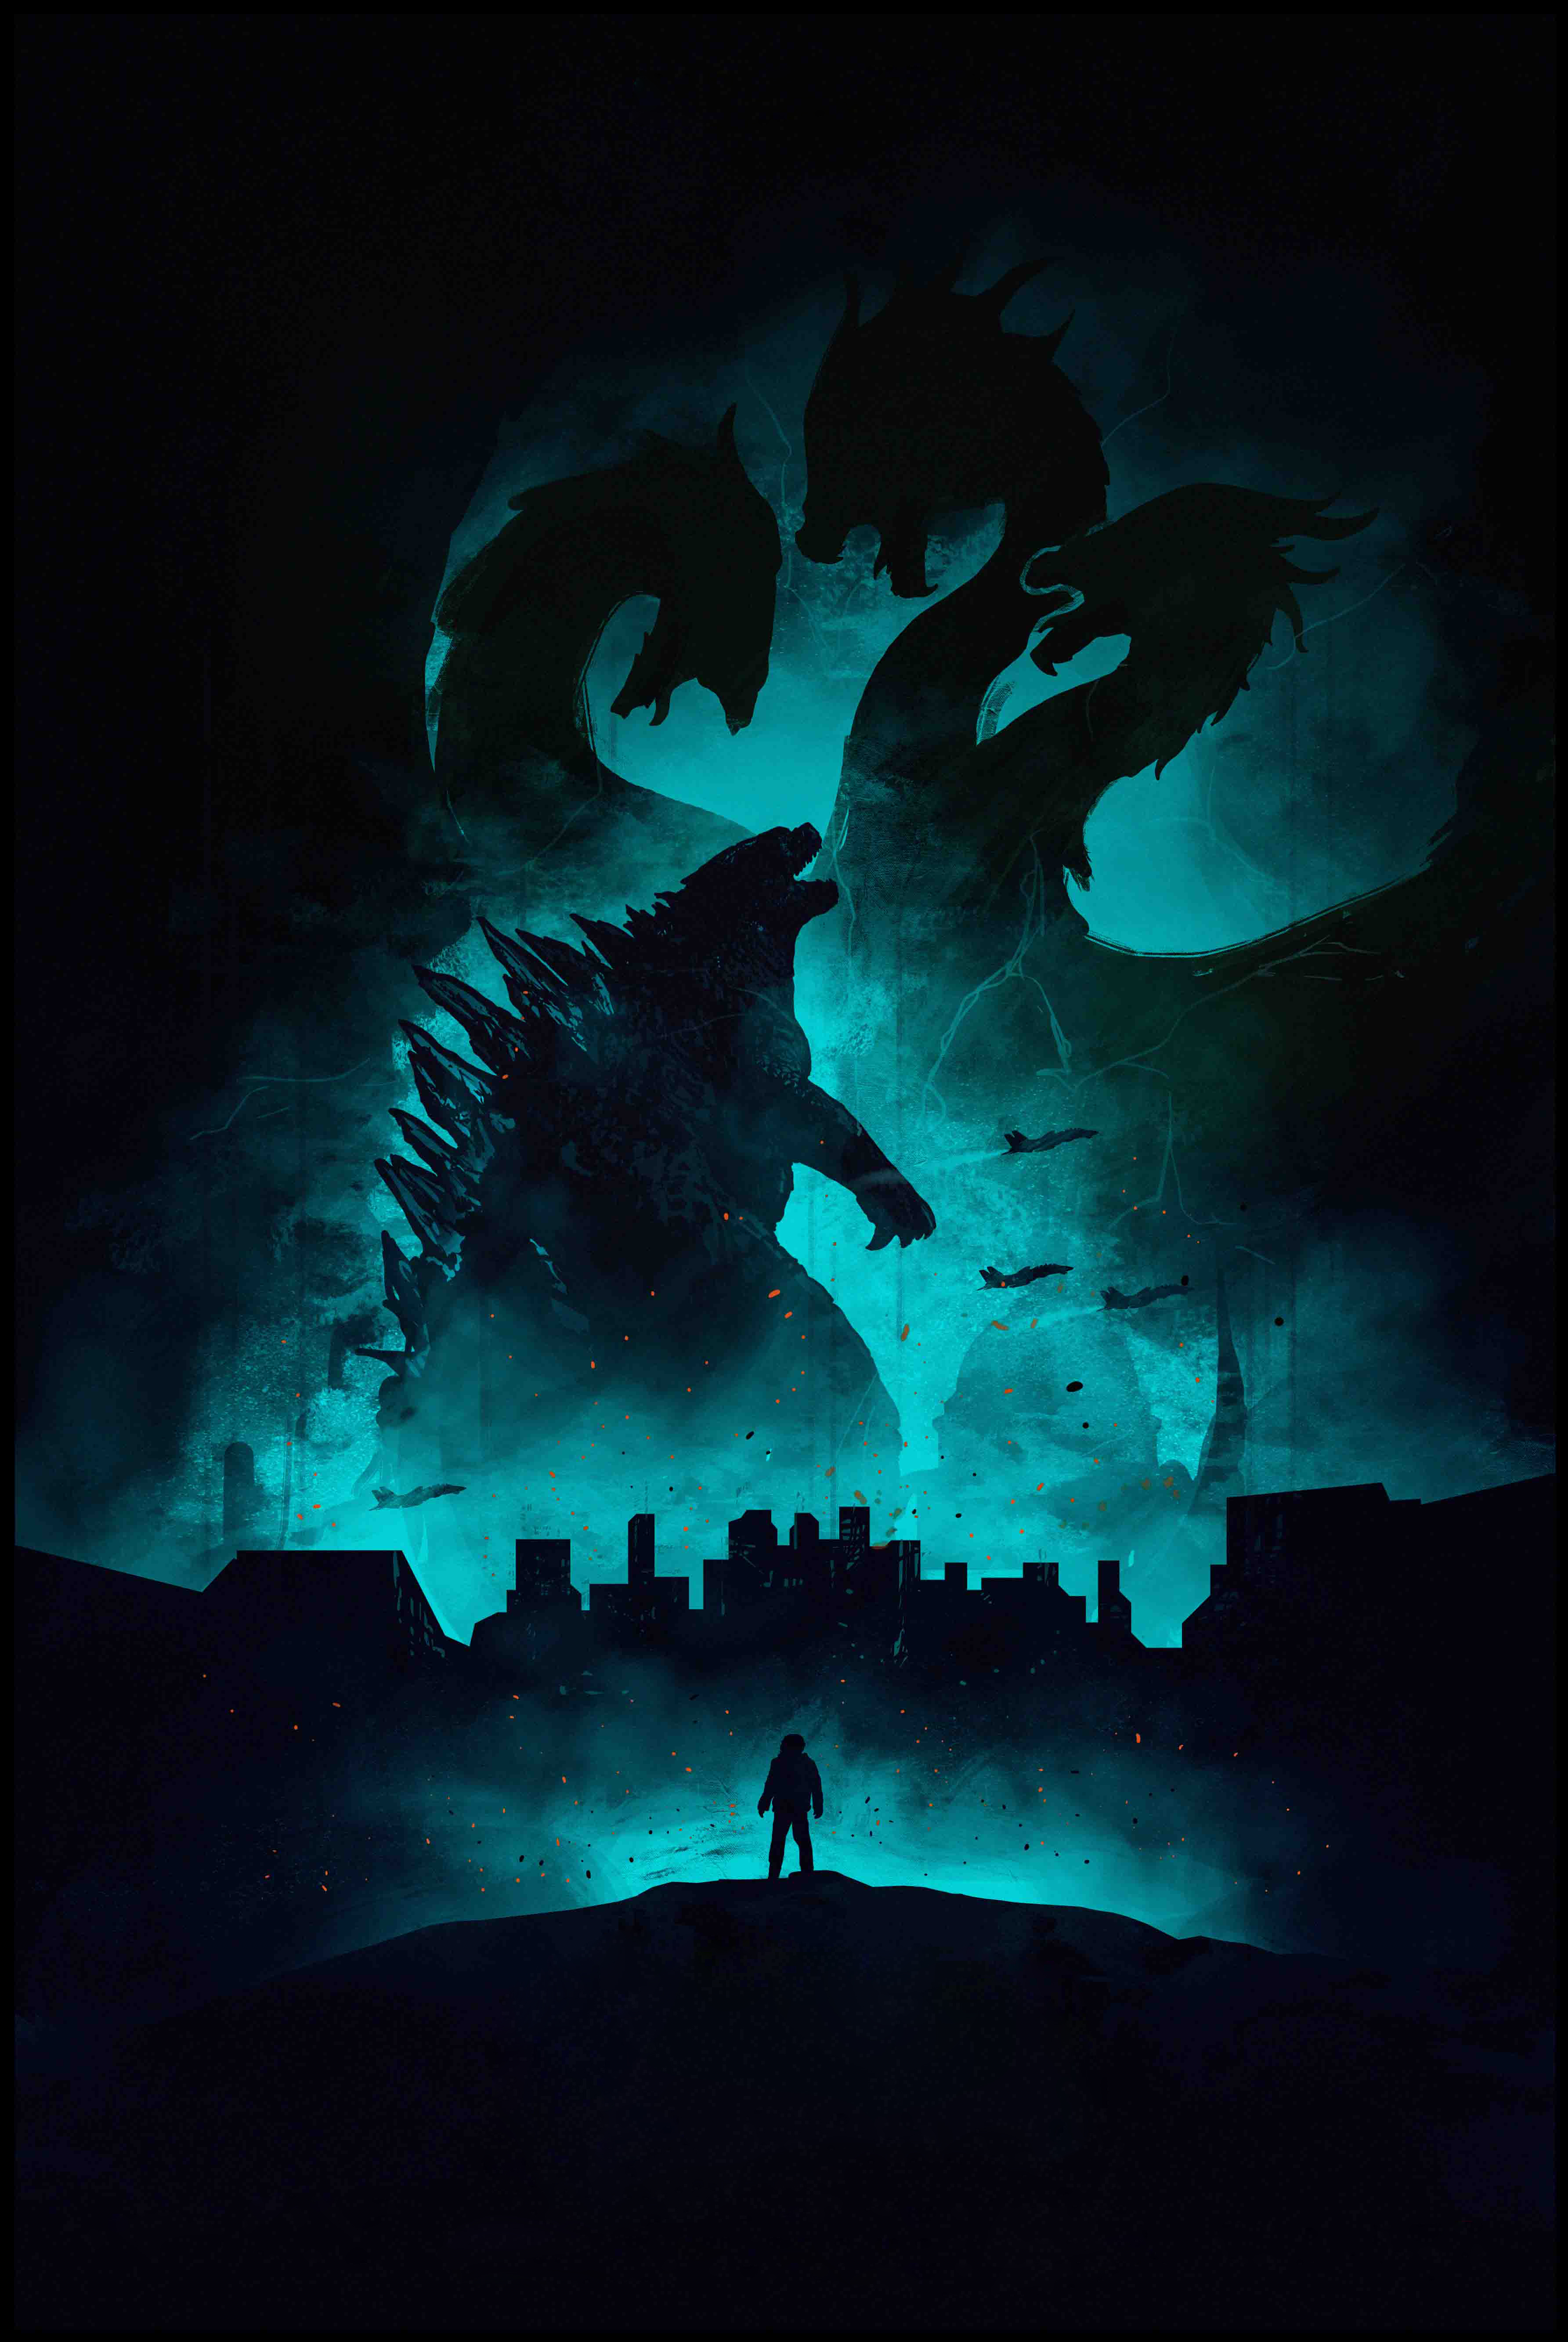 Godzilla King Of The Monsters Wallpaper Hd Picture Image